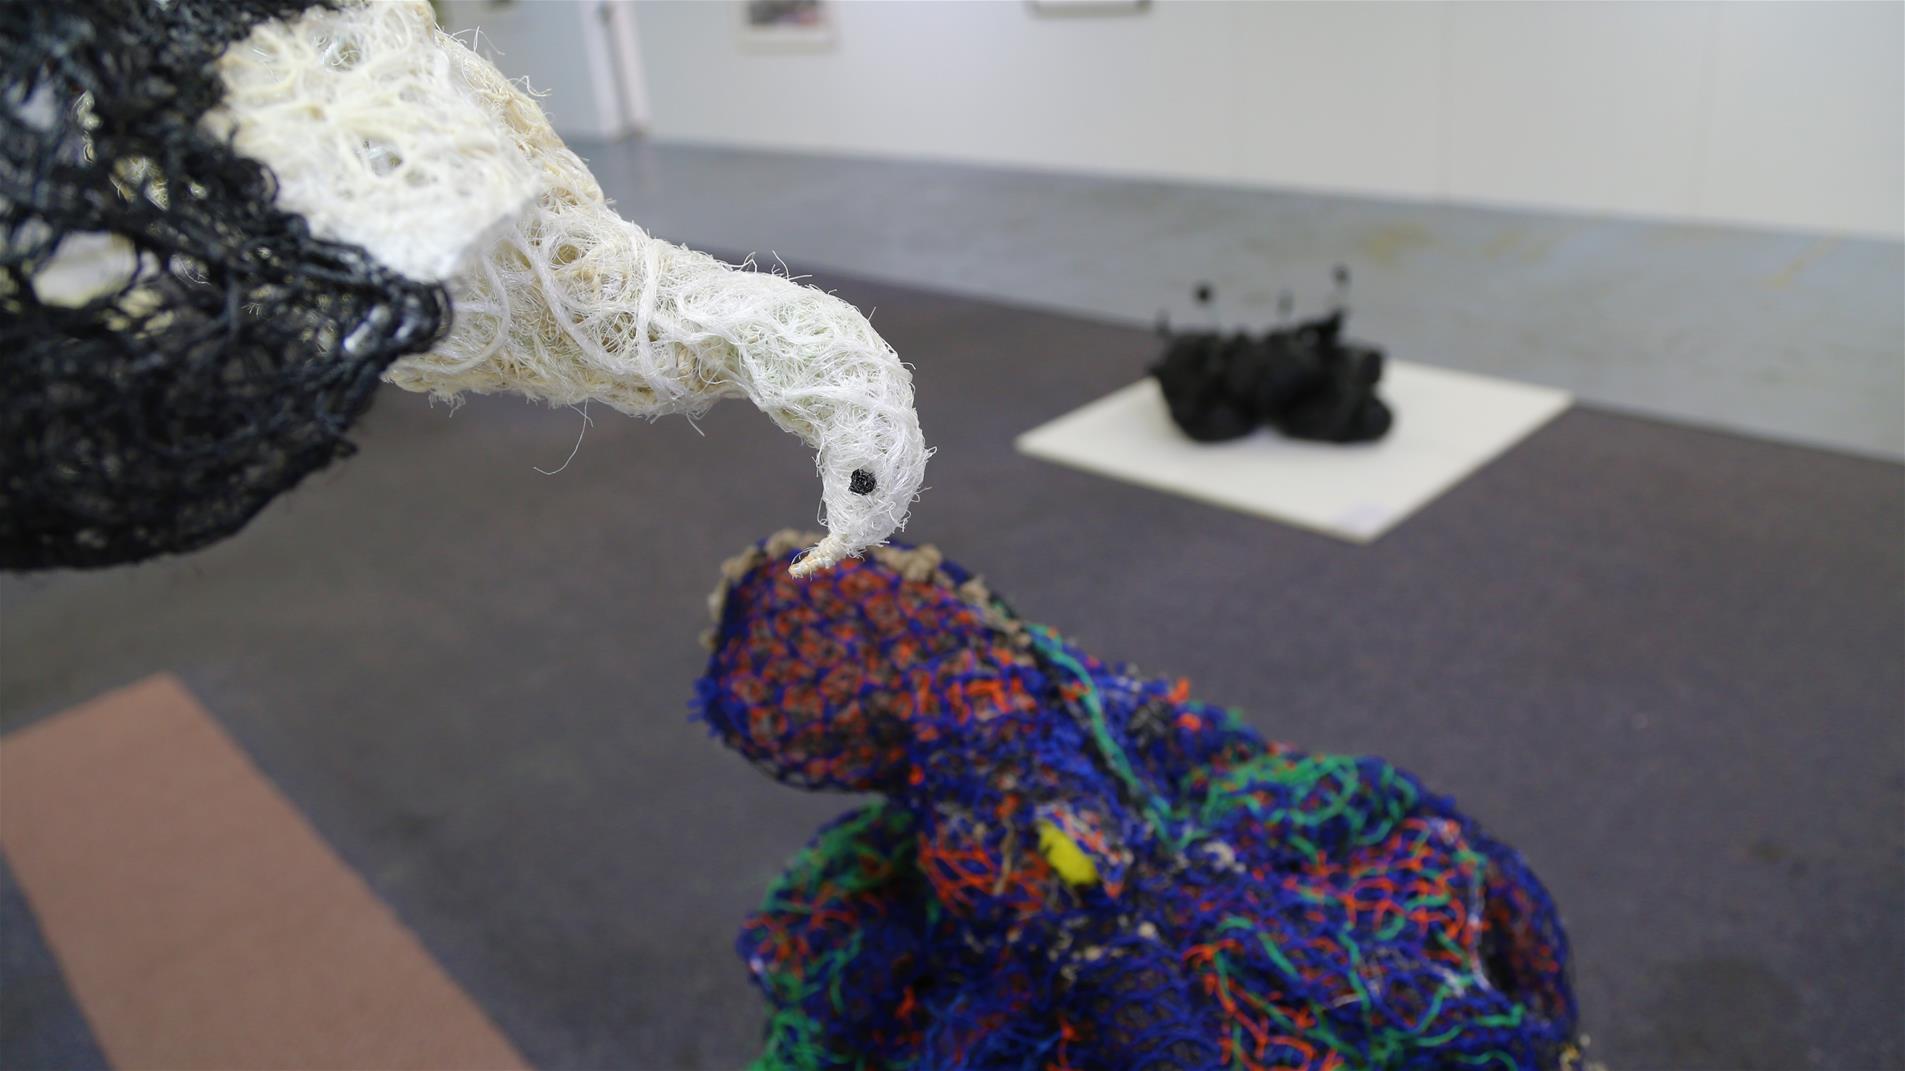 Colourful yarn sculpture and a bird made of yarn hanging in a gallery.